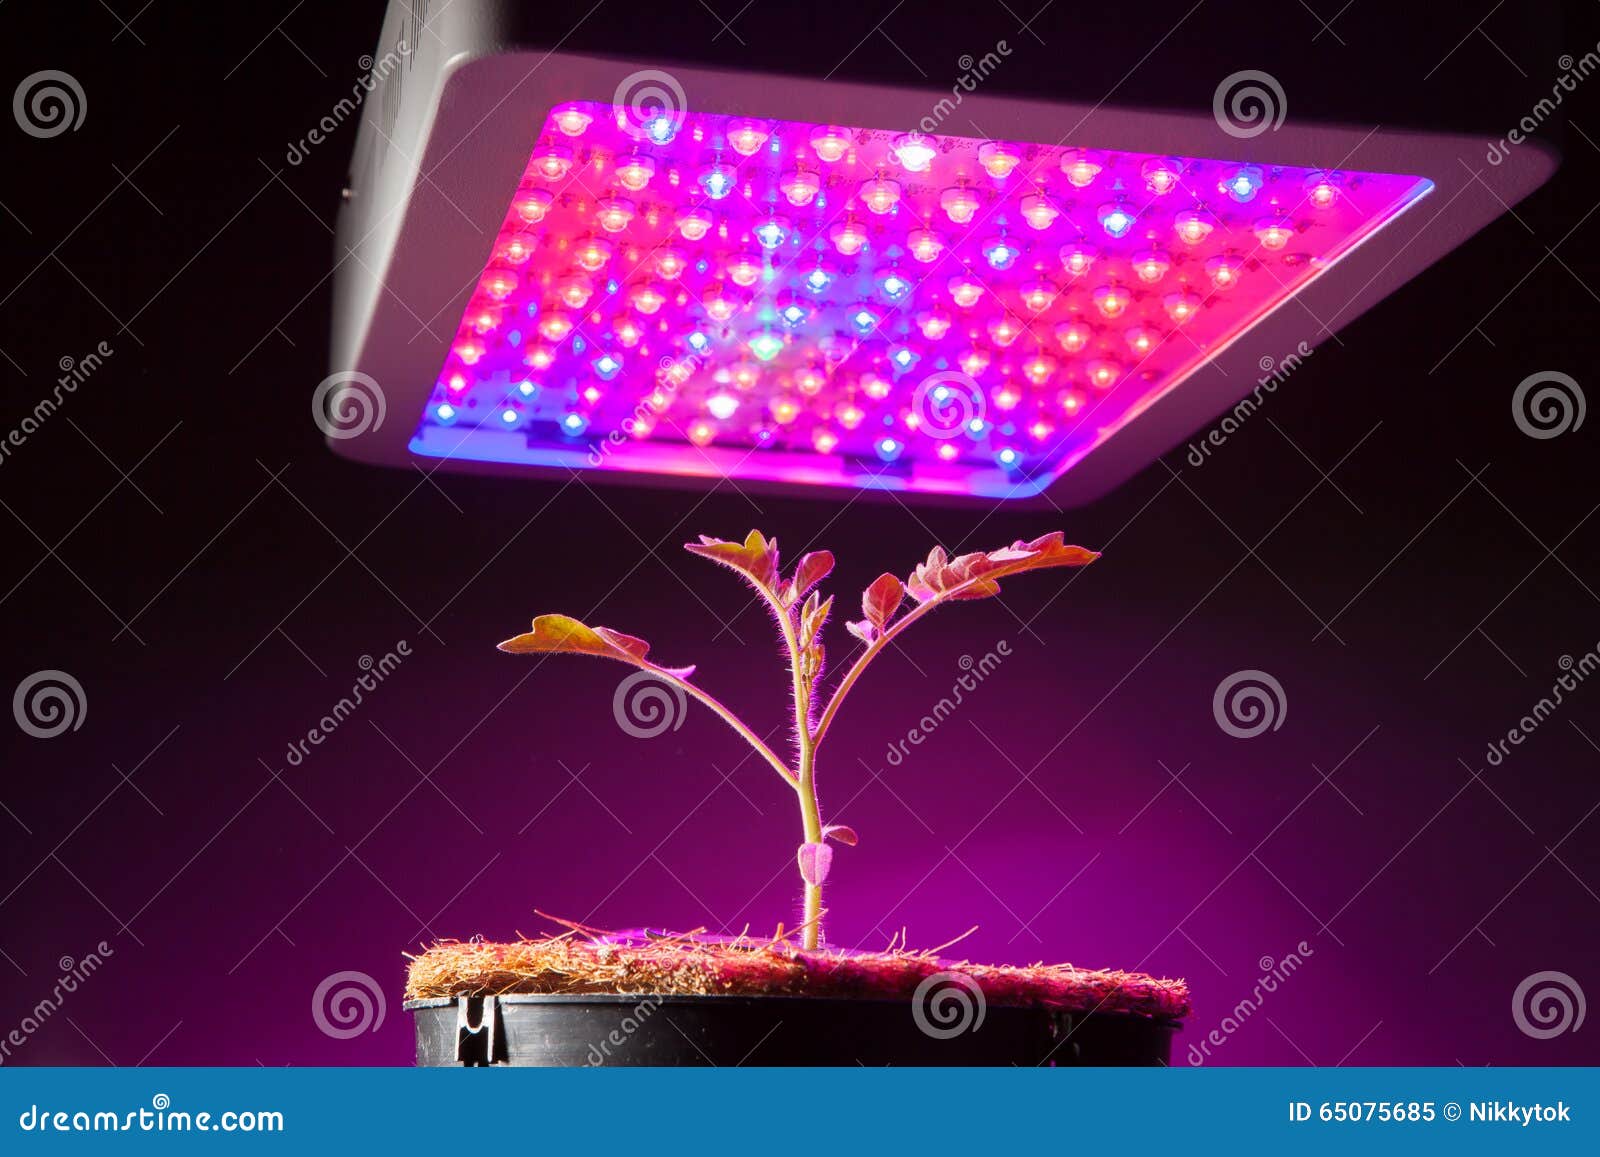 young tomato plant under led grow light